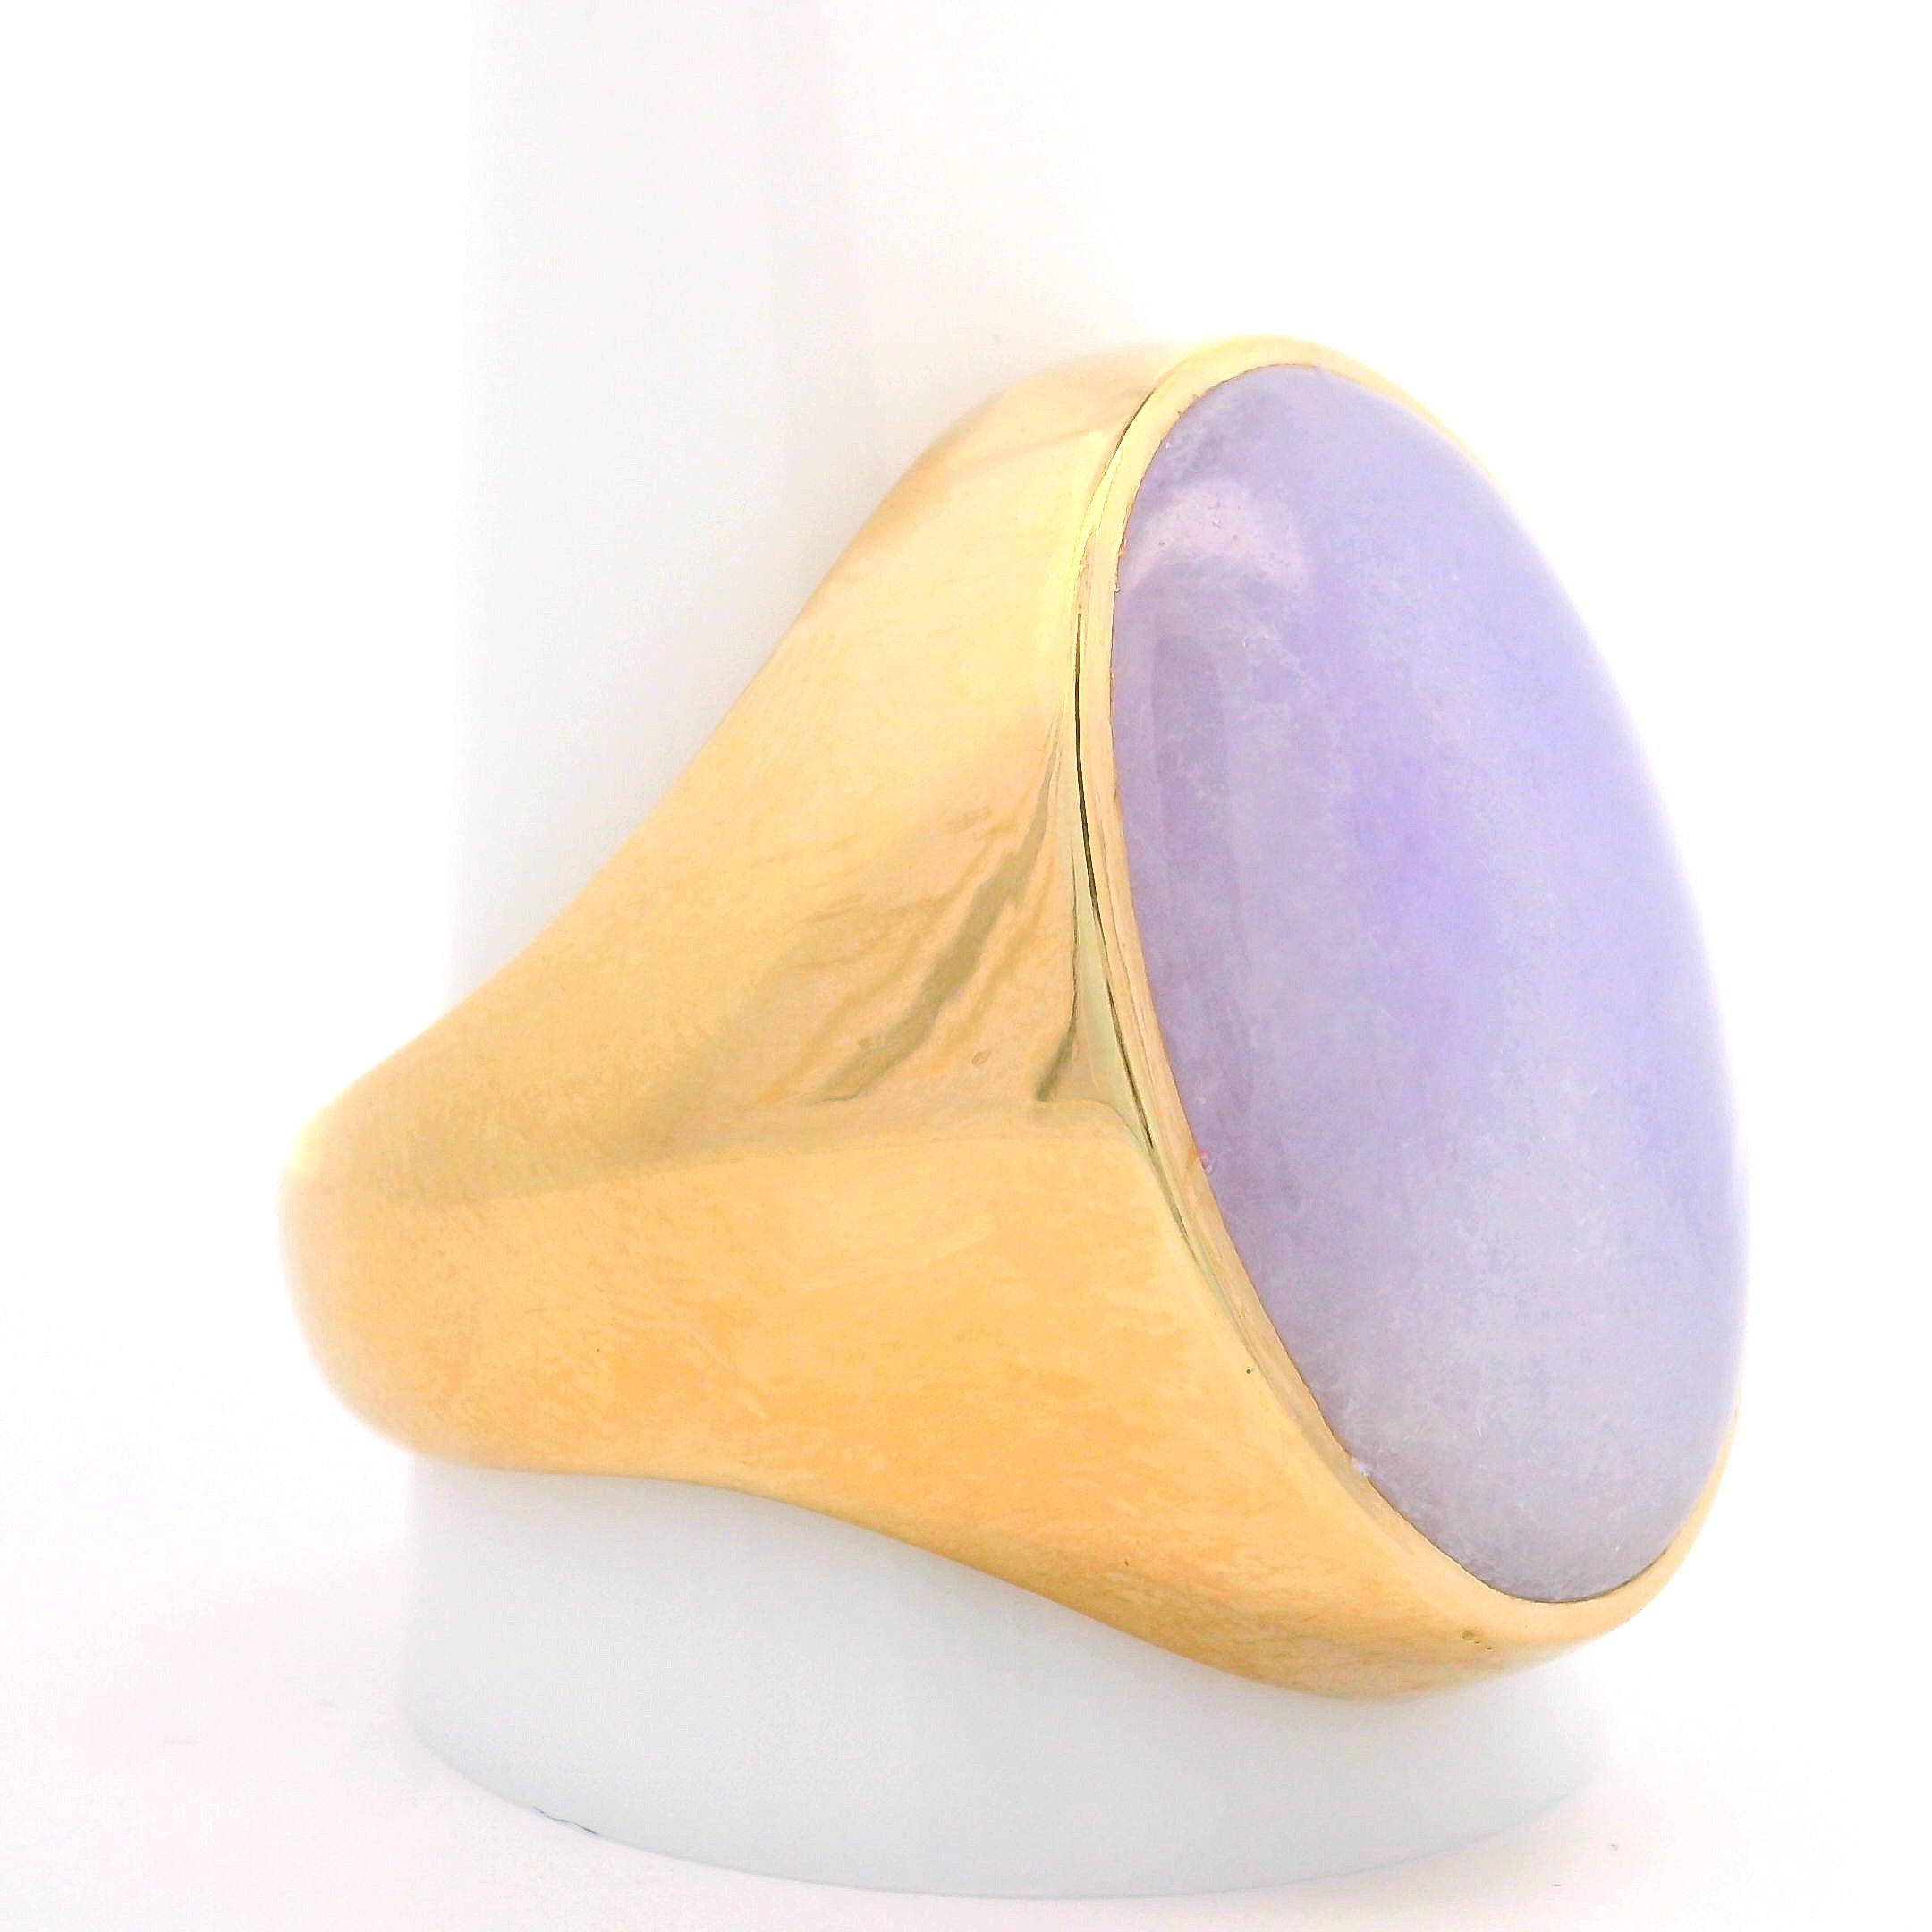 –Stone(s)–
(1) Natural Genuine Jade - Oval Cabochon - Bezel Set - Lavender Color - 23.5x14.9mm (approx.)
Material: Solid 14k Yellow Gold
Weight: 18.06 Grams
Ring Size: 13 (sized on mandrel, please contact us prior to purchase with sizing